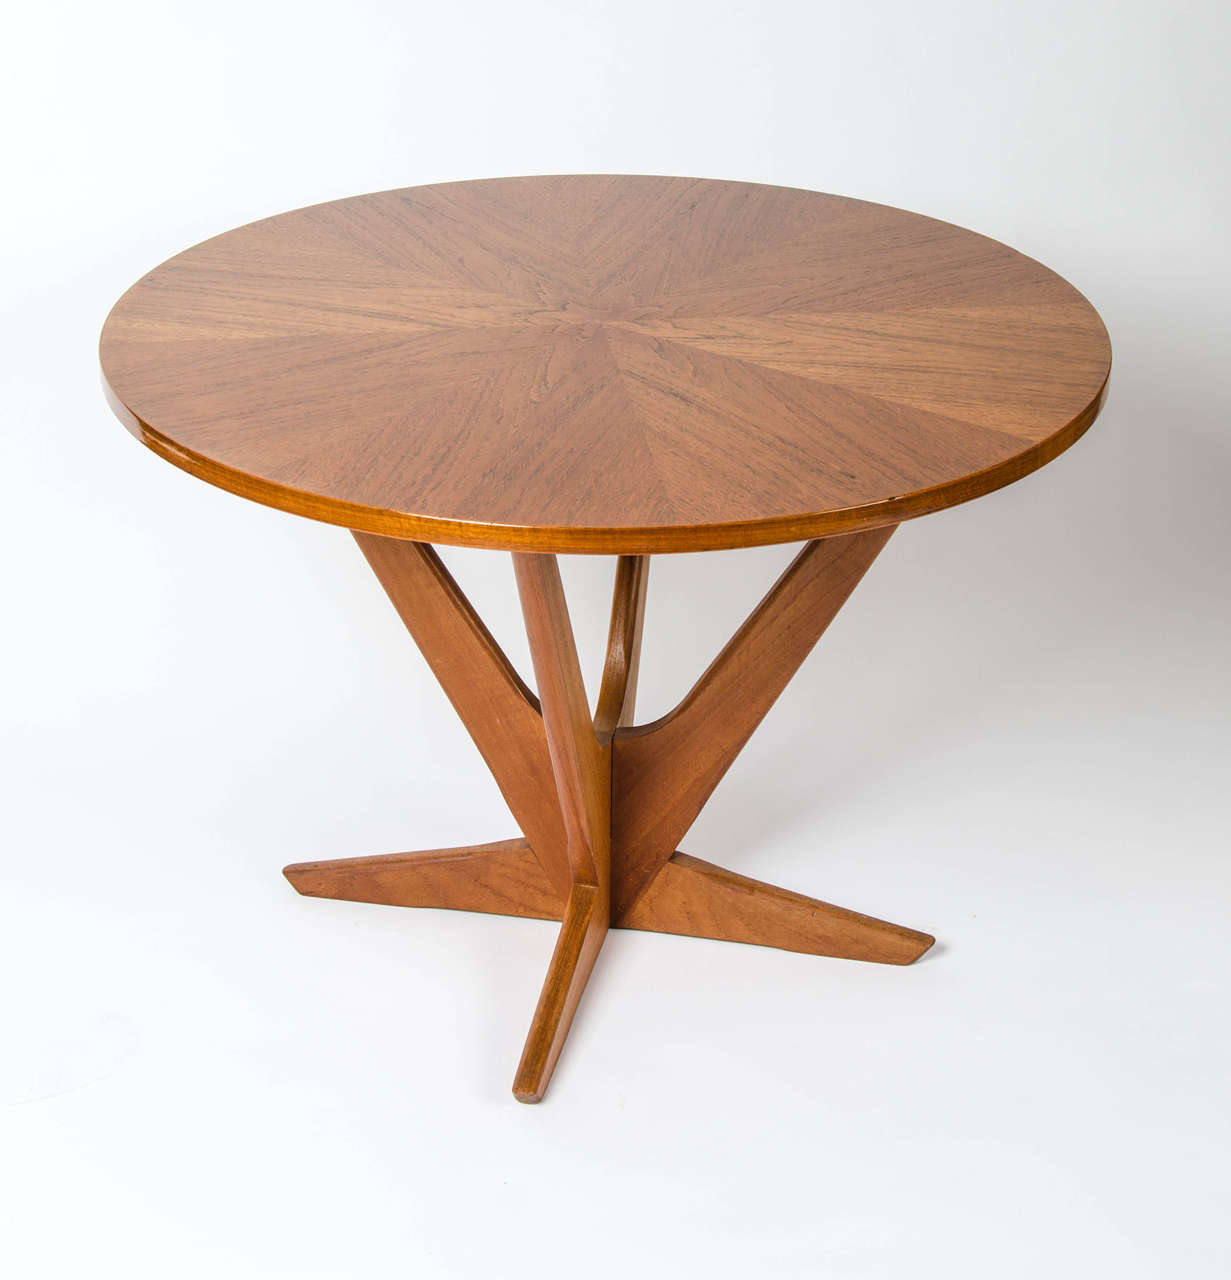 A 1960s coffee table designed by the celebrated Furniture Designer Holger Georg Jensen for Kubus of Denmark. It is beautifully made and the top features radiating teak veneers. It is in a good vintage condition.